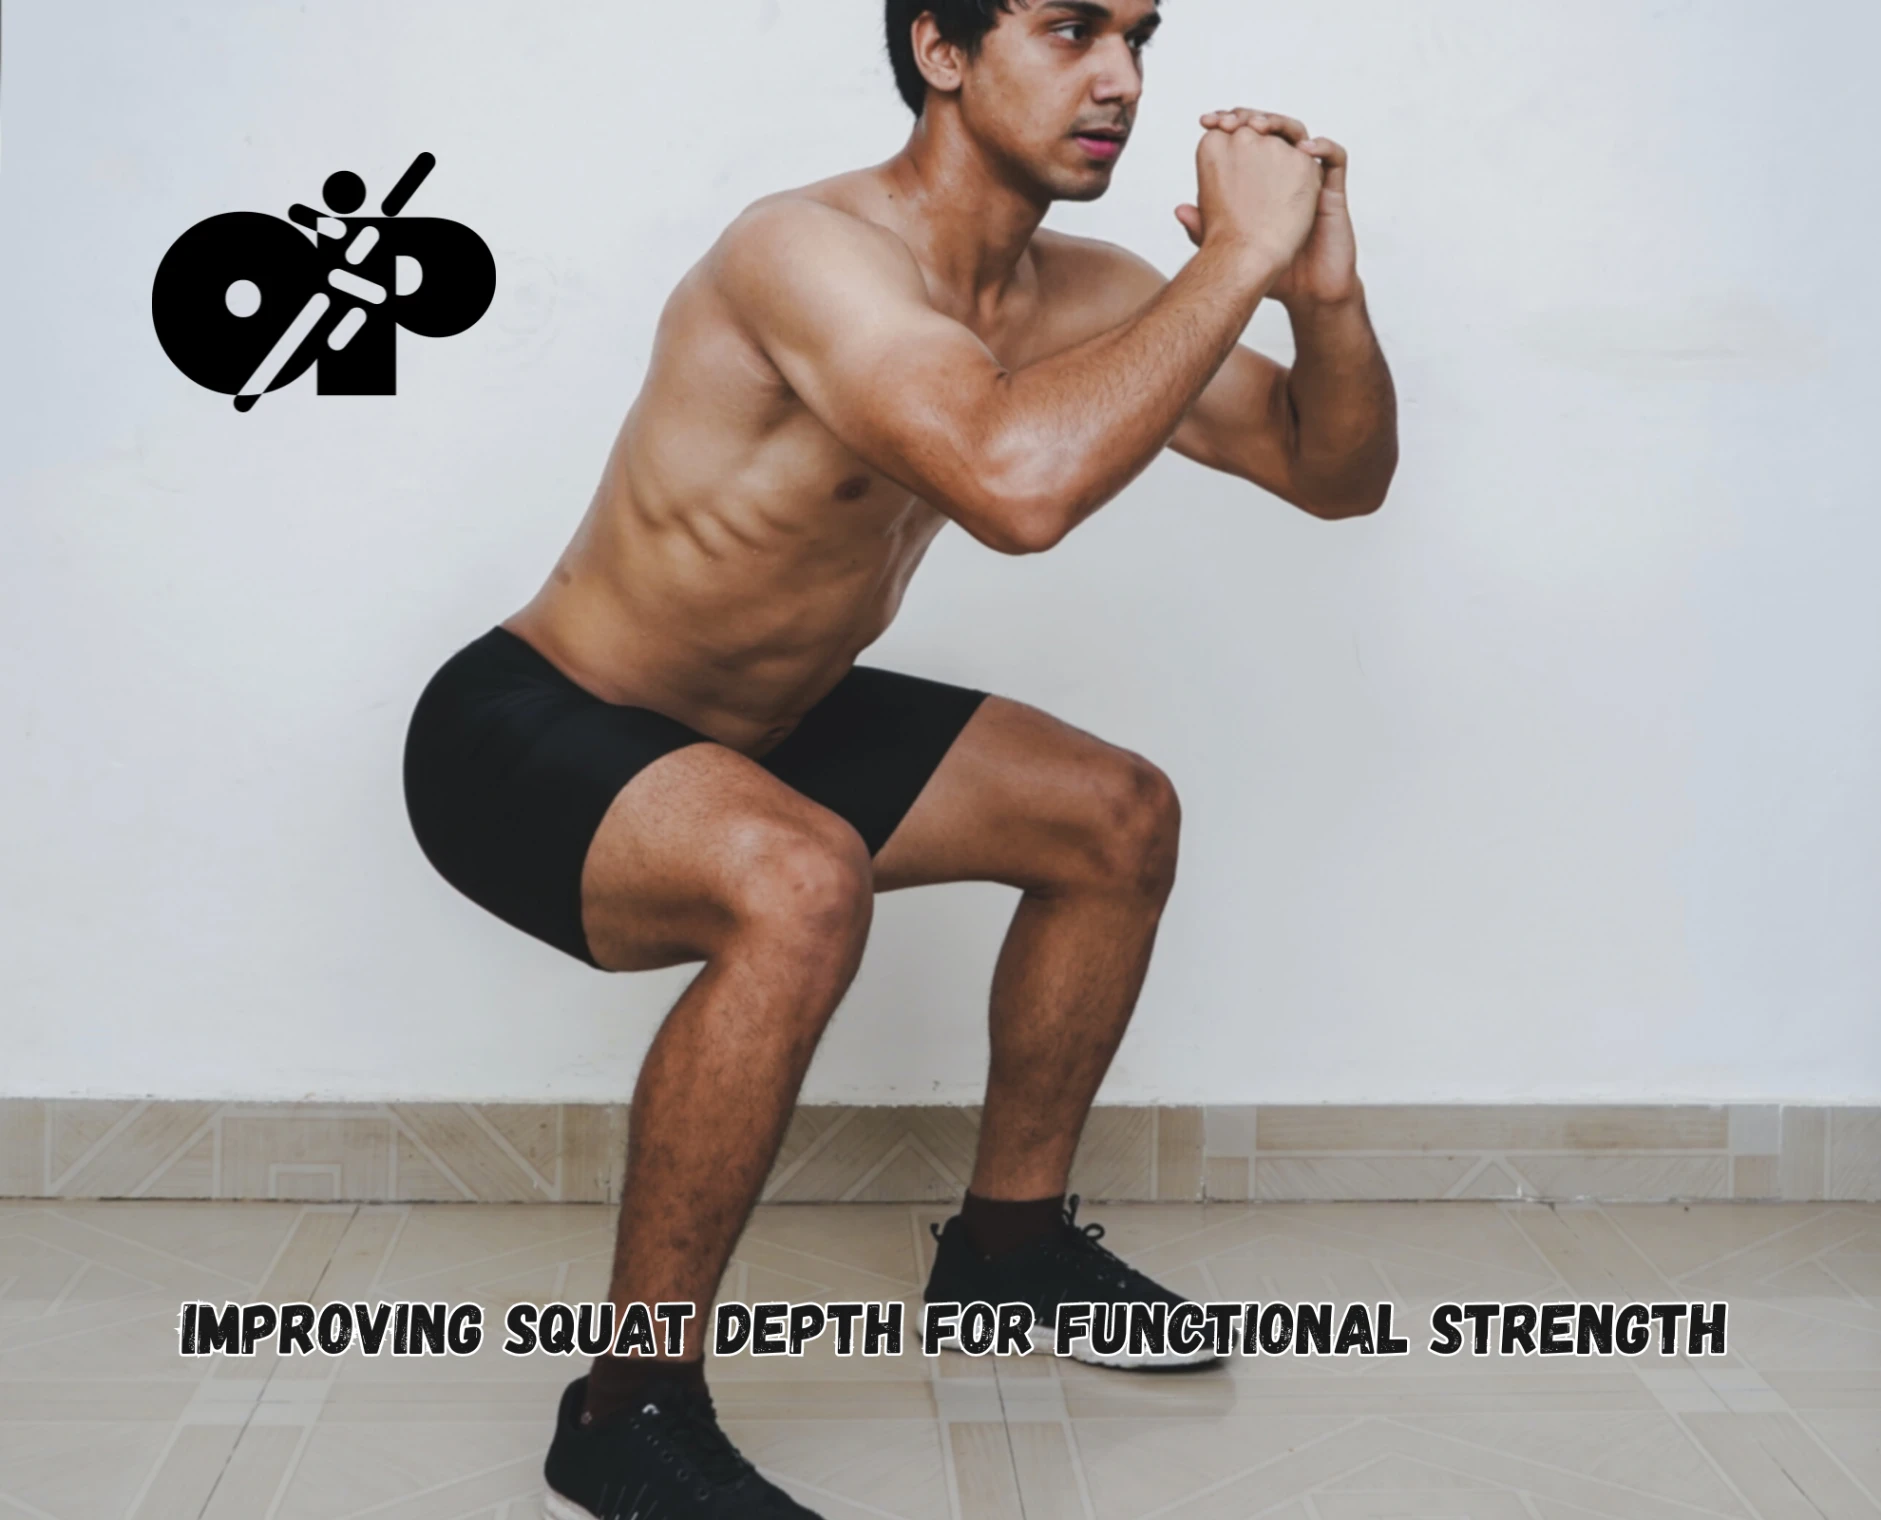 19. A Guide to Improving Squat Depth for Functional Strength